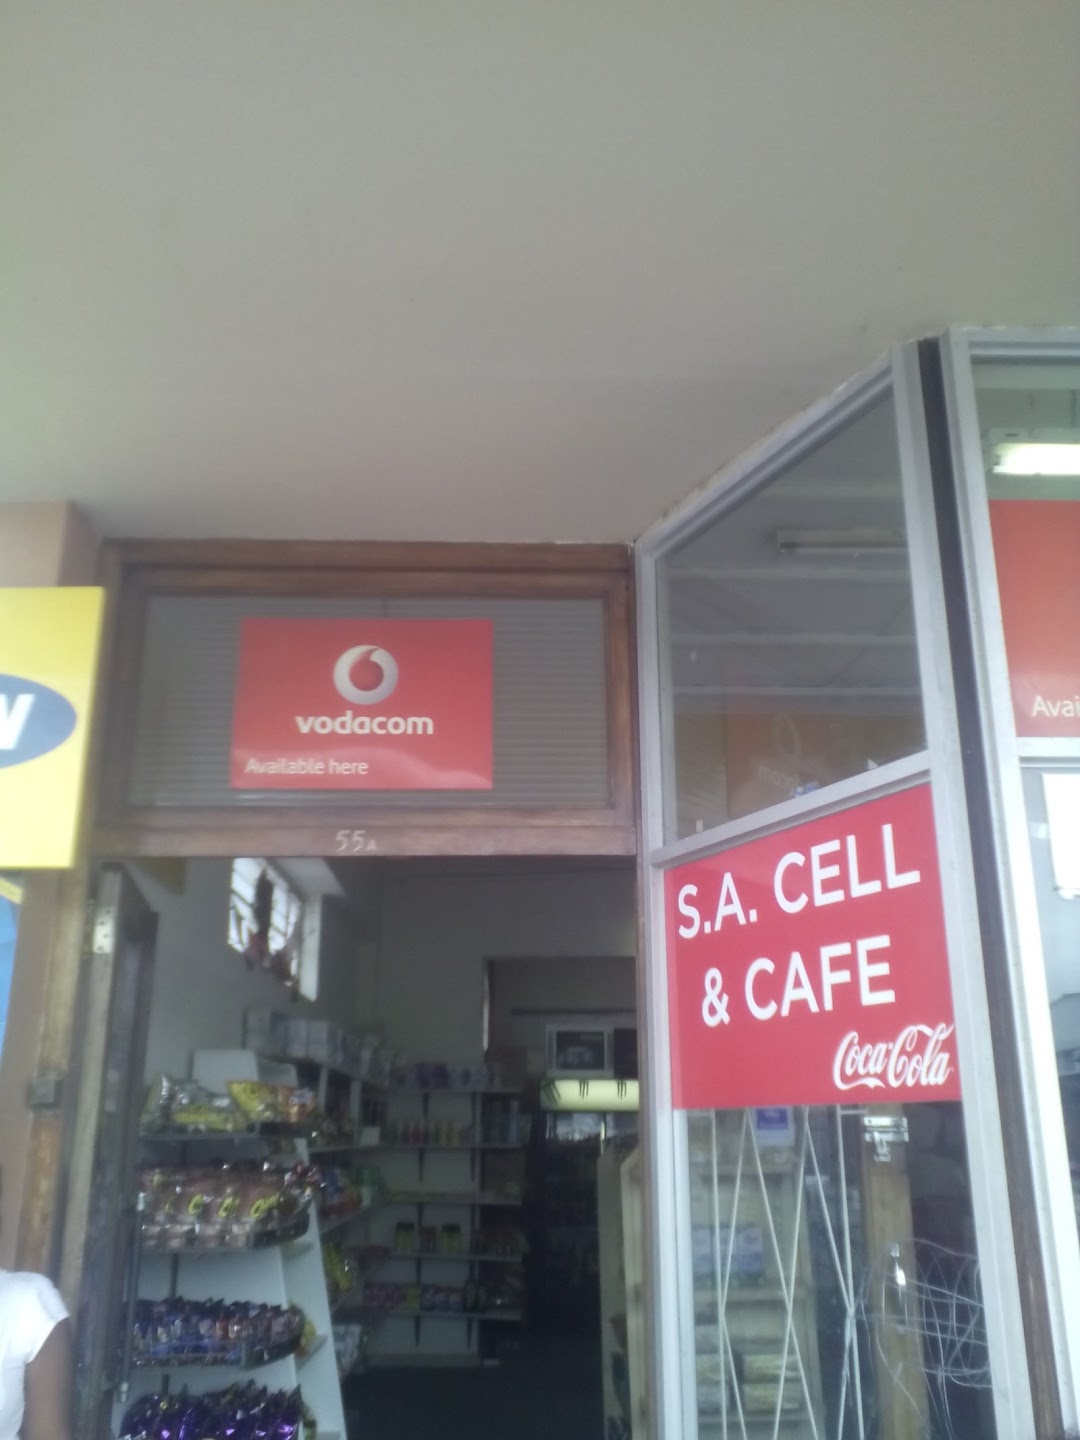 S. A. CELL & CAFE